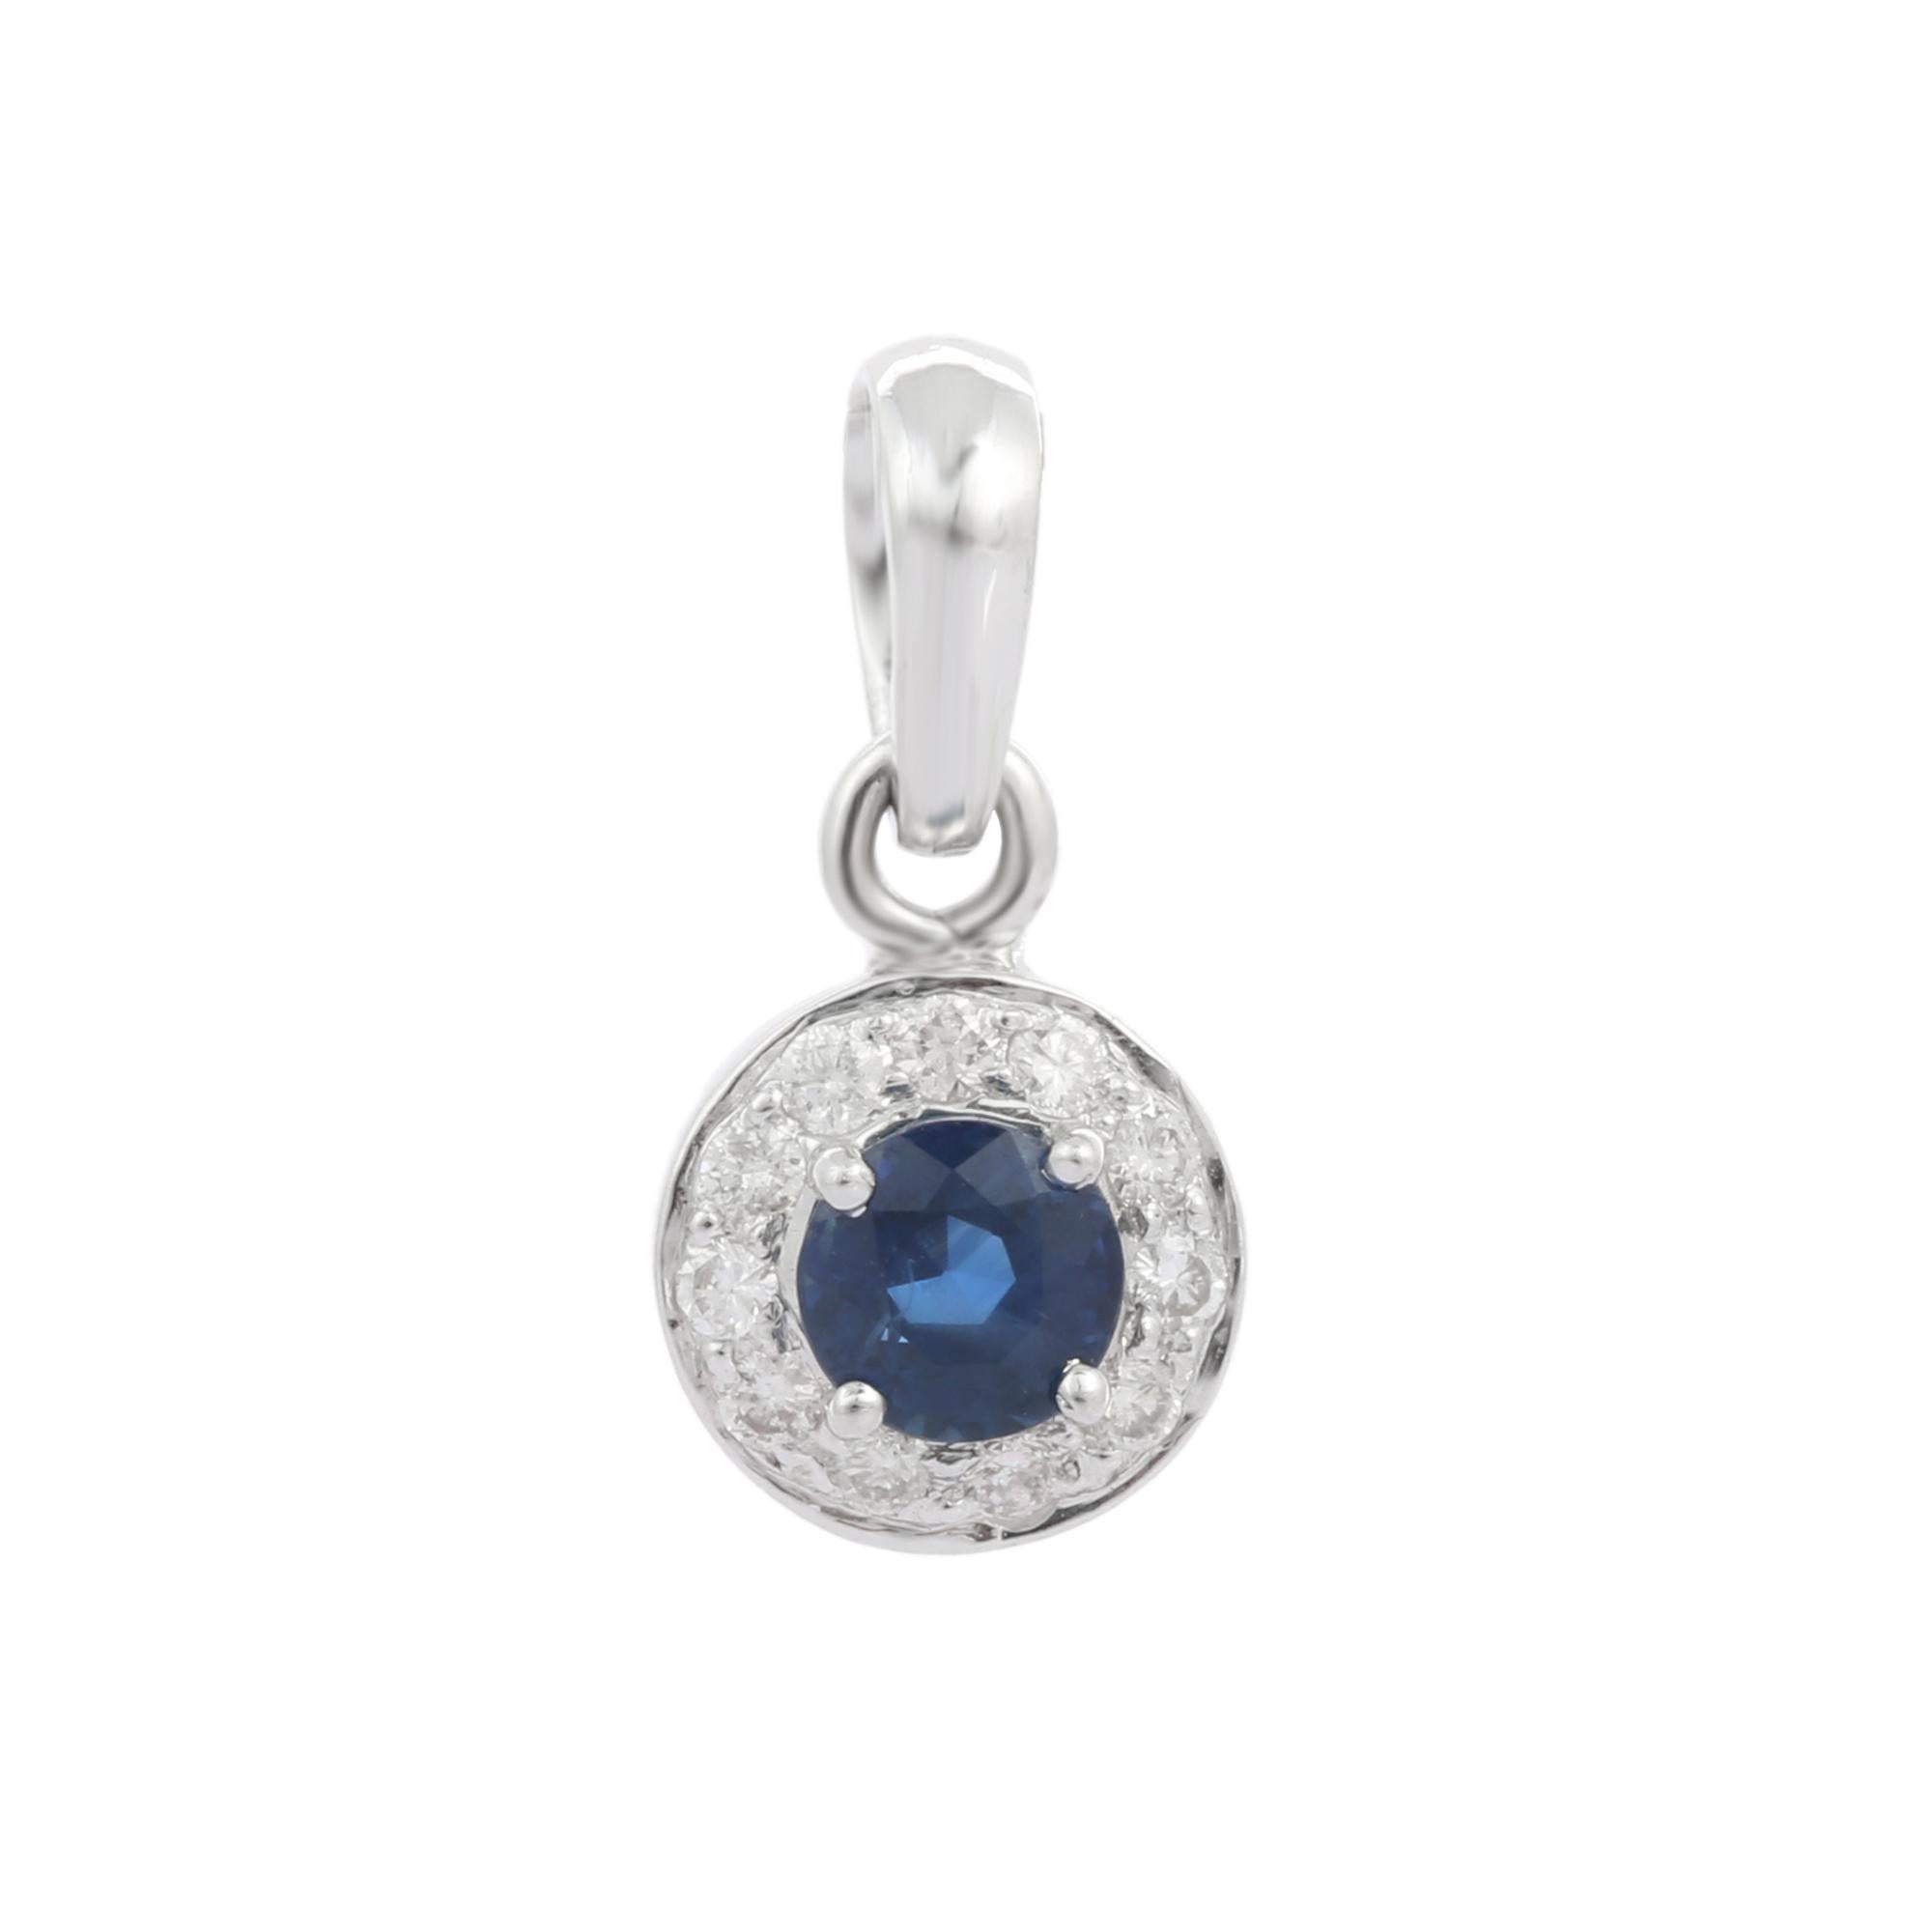 Natural Blue Sapphire pendant in 14K Gold. It has a round cut sapphire studded with diamonds that completes your look with a decent touch. Pendants are used to wear or gifted to represent love and promises. It's an attractive jewelry piece that goes